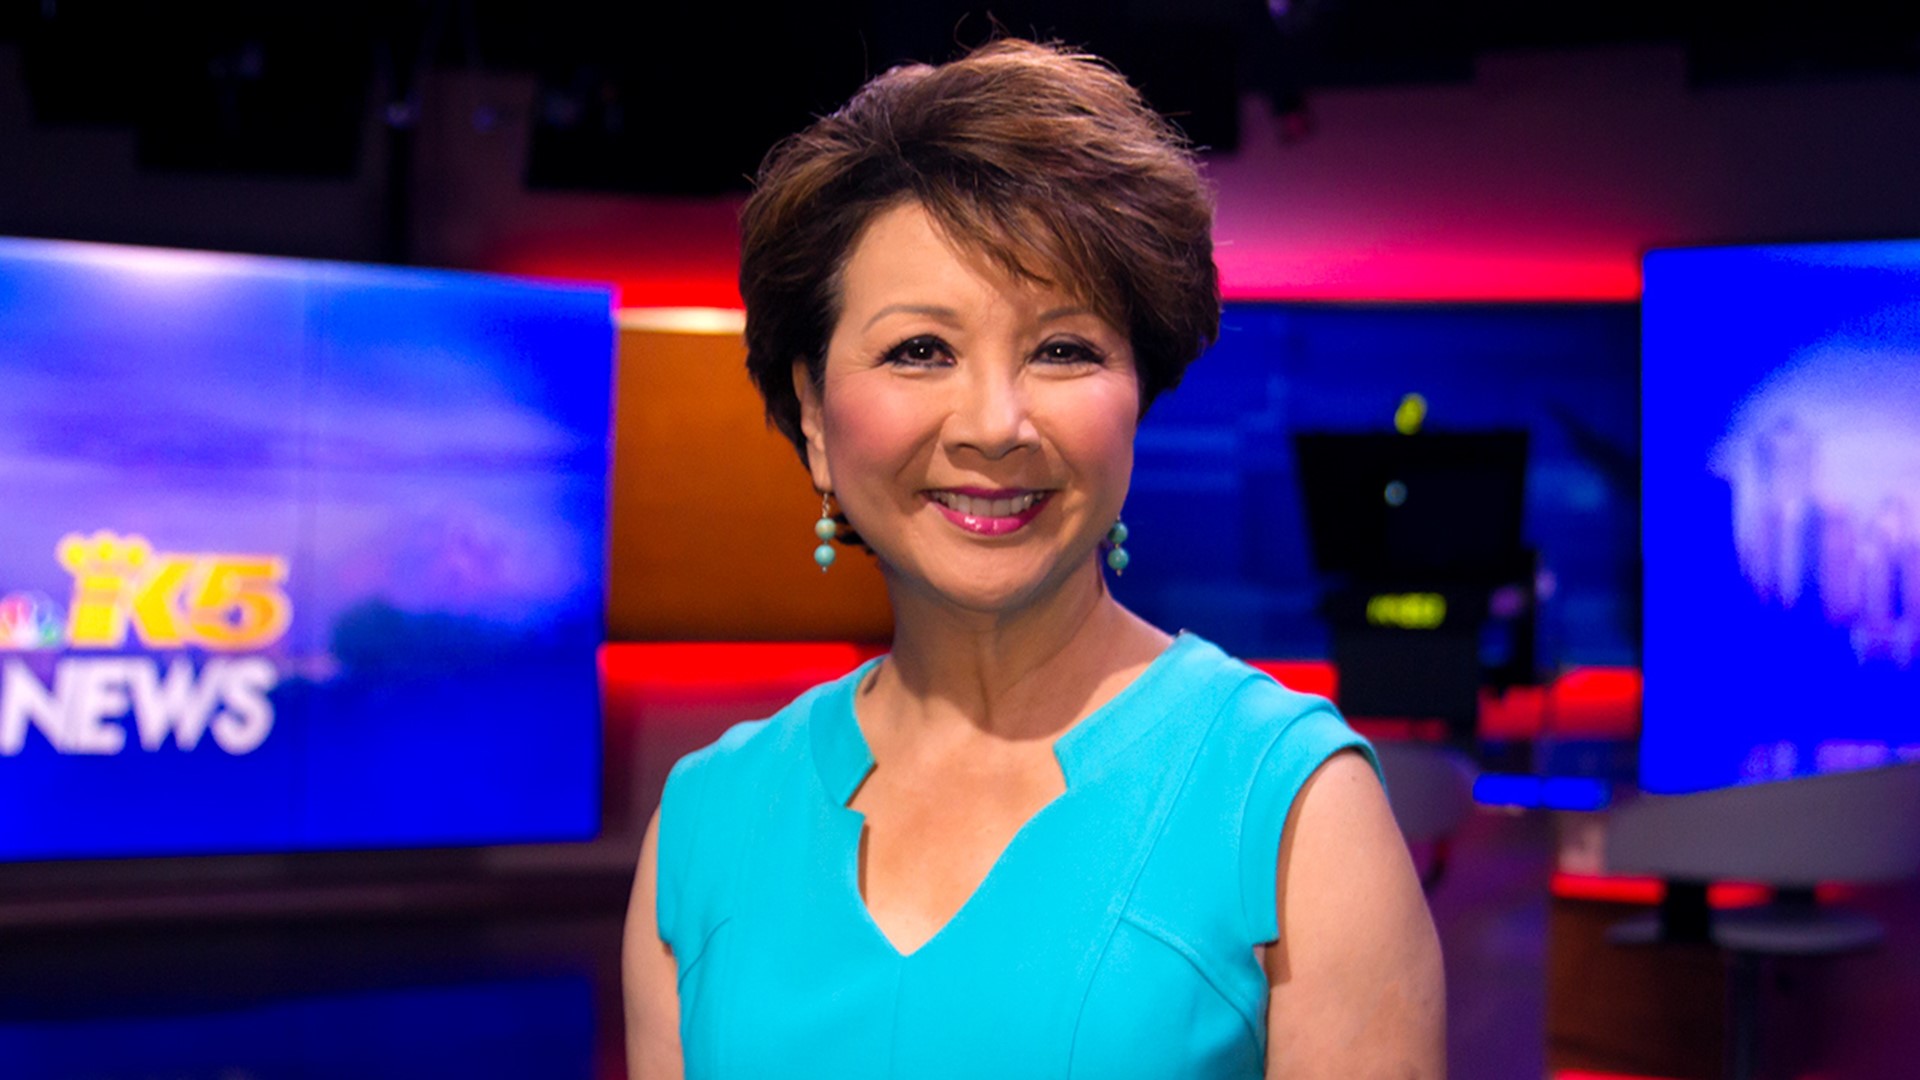 KING 5 legend Lori Matsukawa is being honored by the Japanese government with the Order of the Rising Sun Gold and Silver Rays